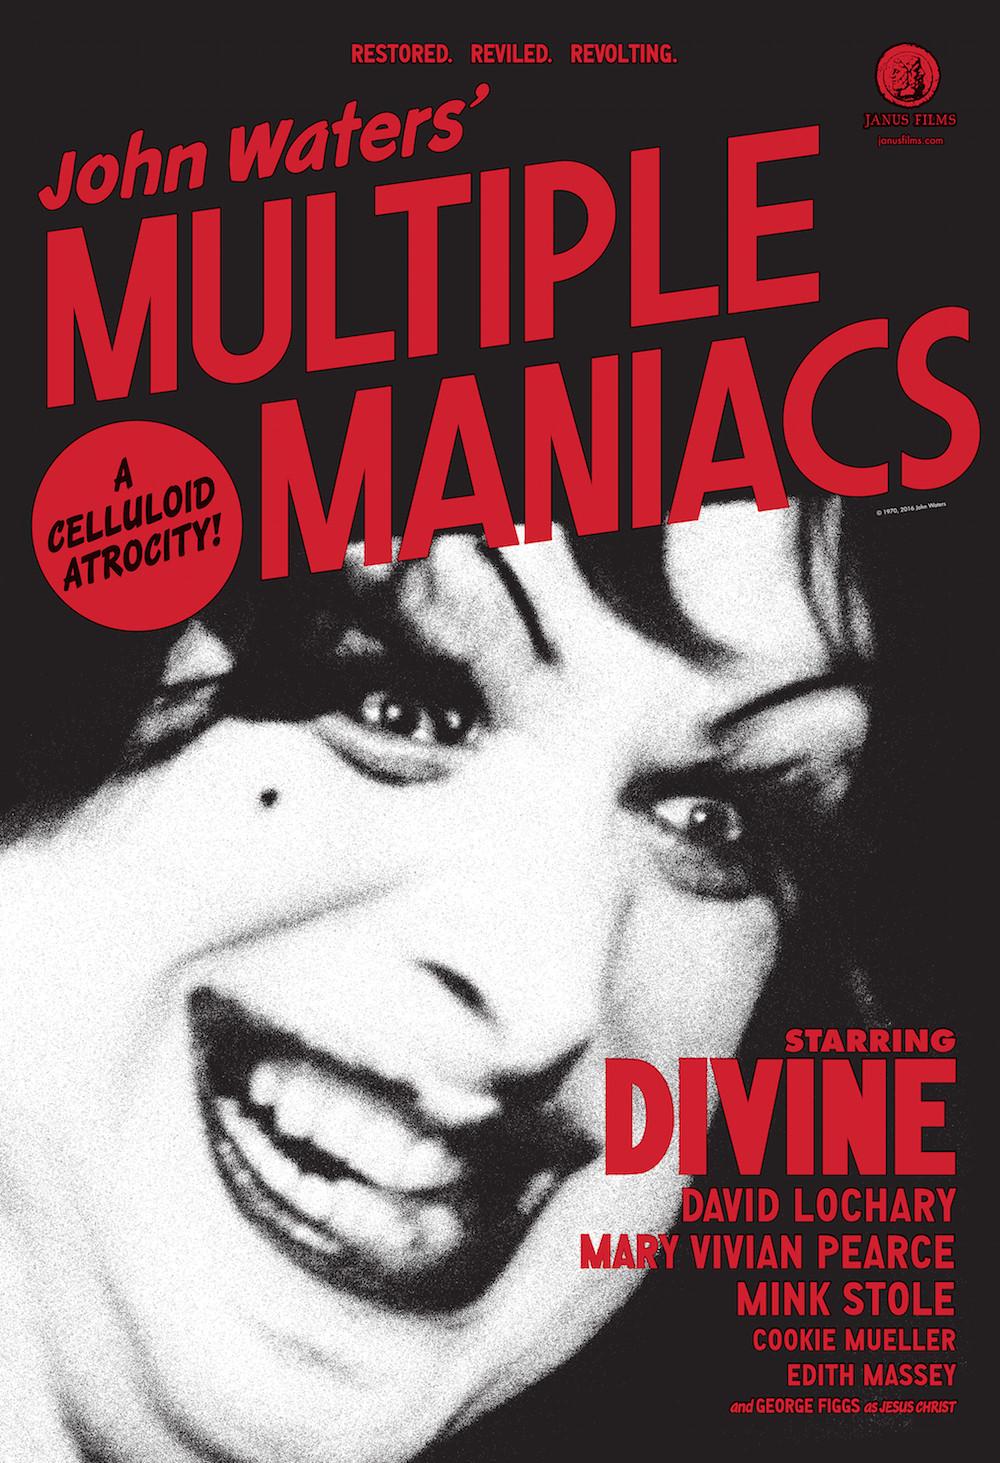 john-waters-remembers-multiple-maniacs-his-lsd-fueled-cavalcade-of-perversion-body-image-1470365127-size 1000